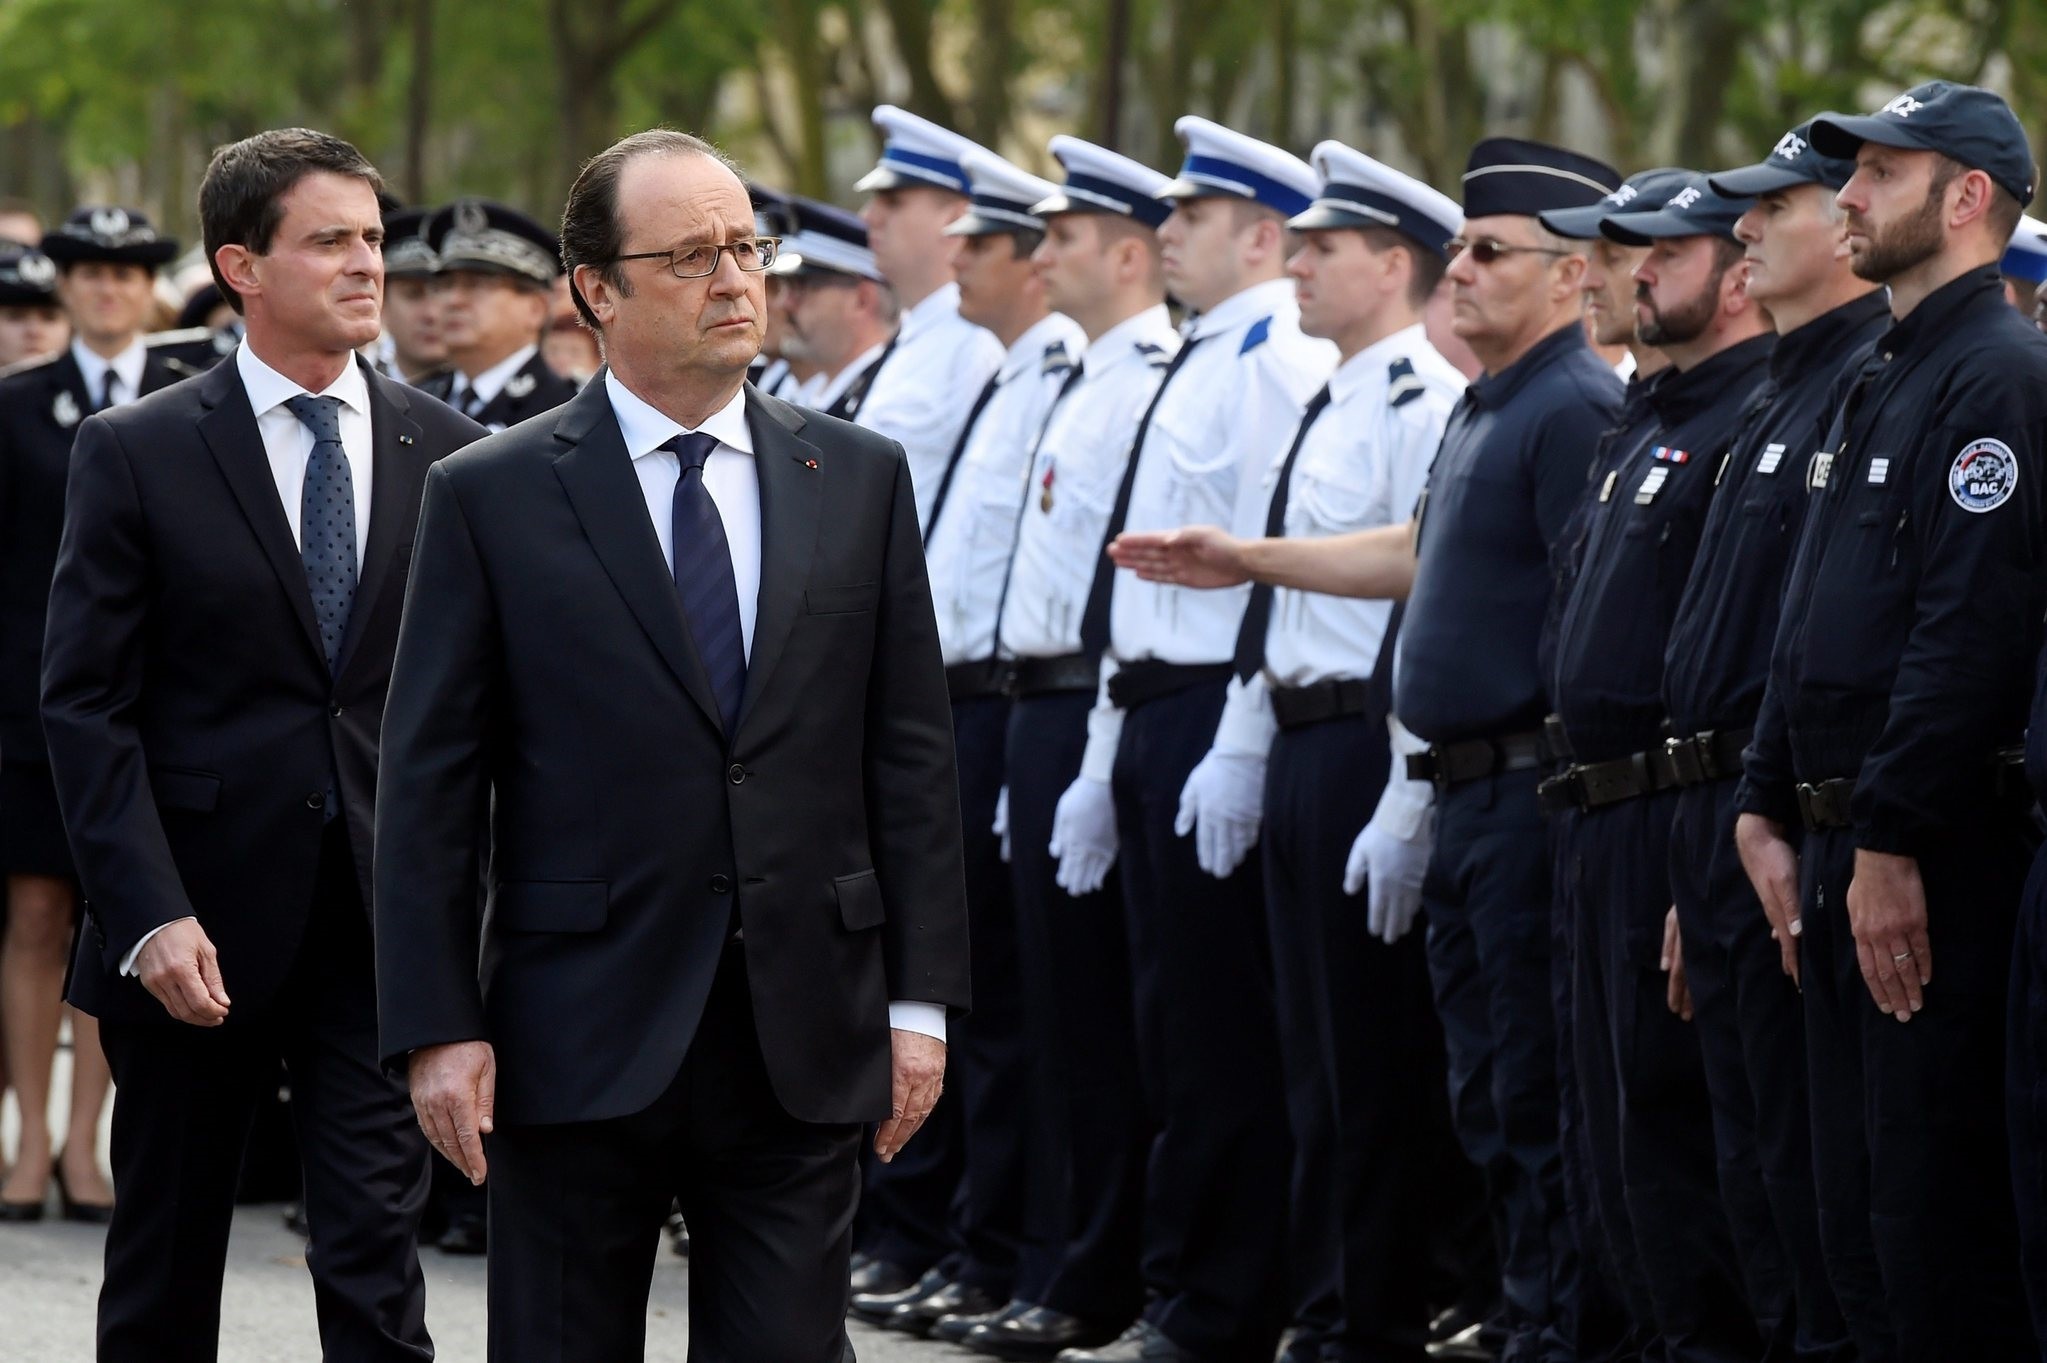 French President Francois Hollande (2nd R) and Prime Minister Manuel Valls (L) attend a memorial ceremony honouring the police couple who were killed by Daesh. (EPA Photo)